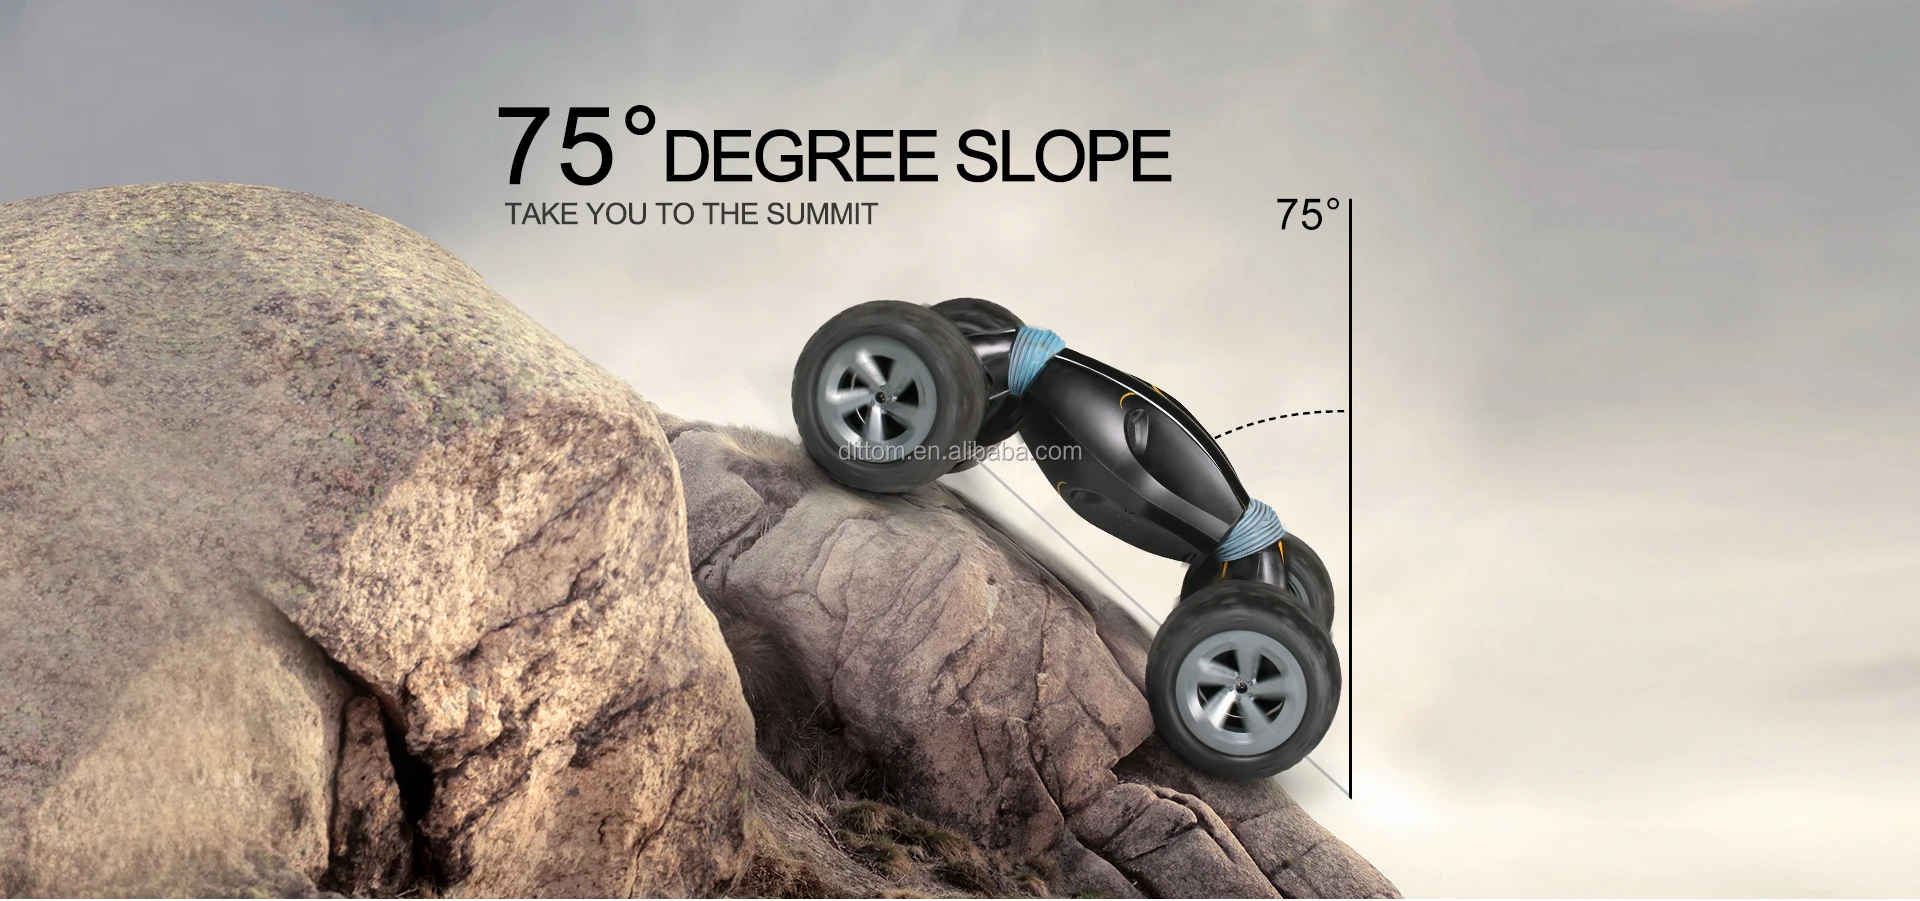 Double Sided Torsion car 2.4G 4WD 1:10 RC Twist Car Overturned Flexible Spinner Large Rc Stunt Rock Crawler truck